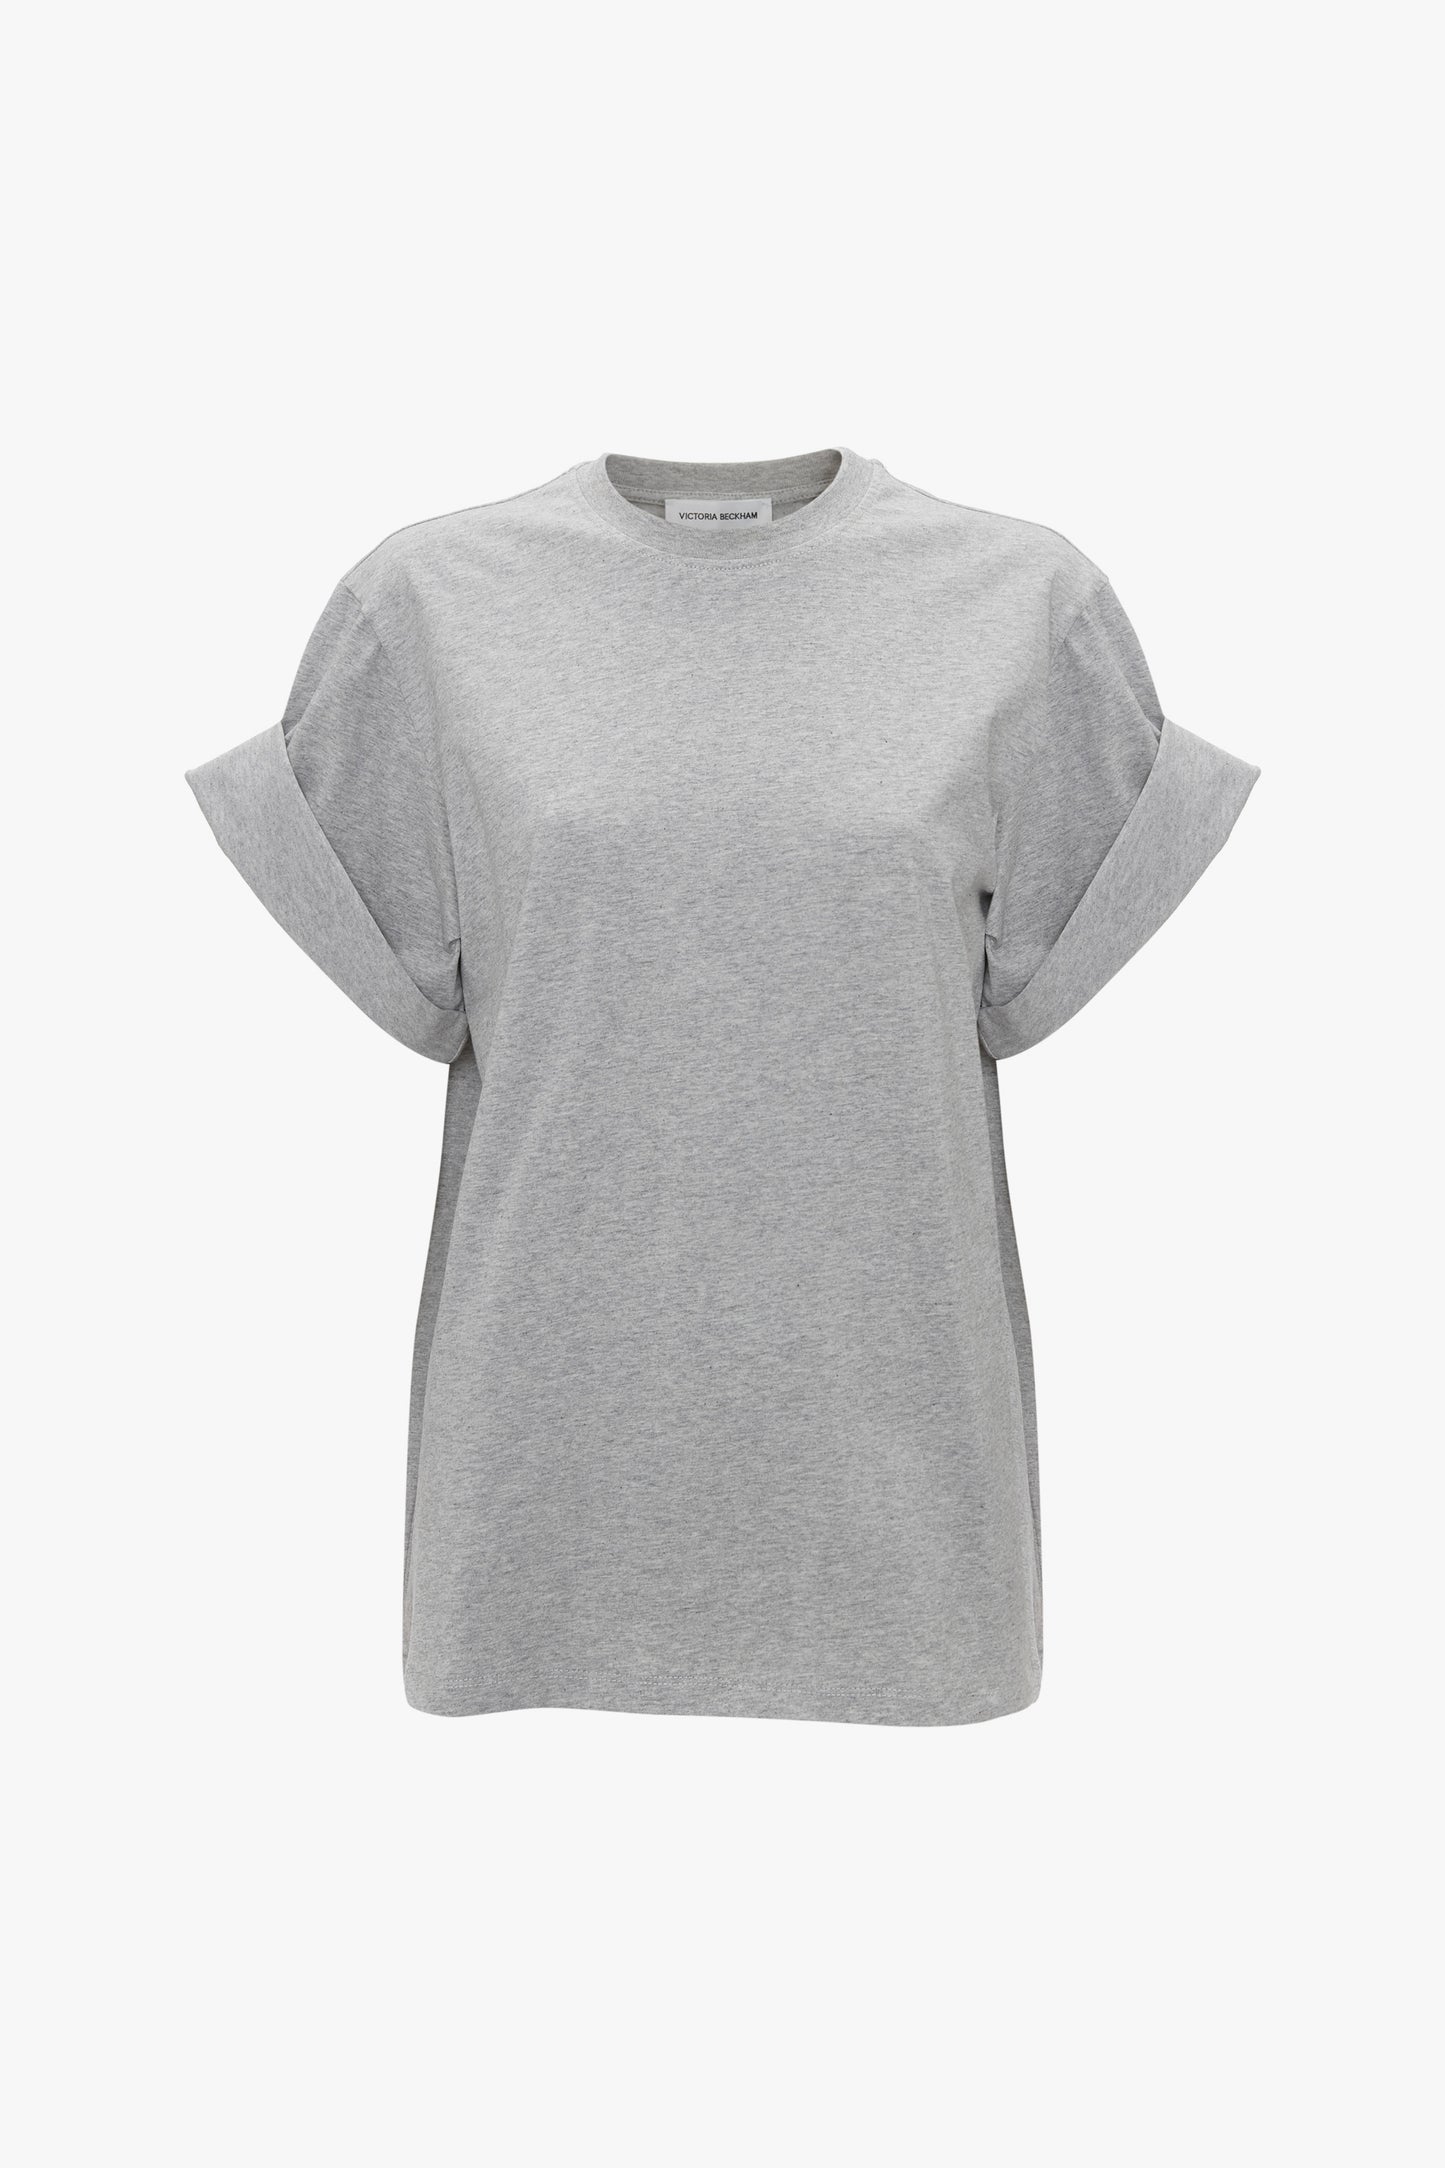 Victoria Beckham asymmetric relaxed fit T-shirt in grey marl with short, puffed sleeves, displayed on a plain white background.